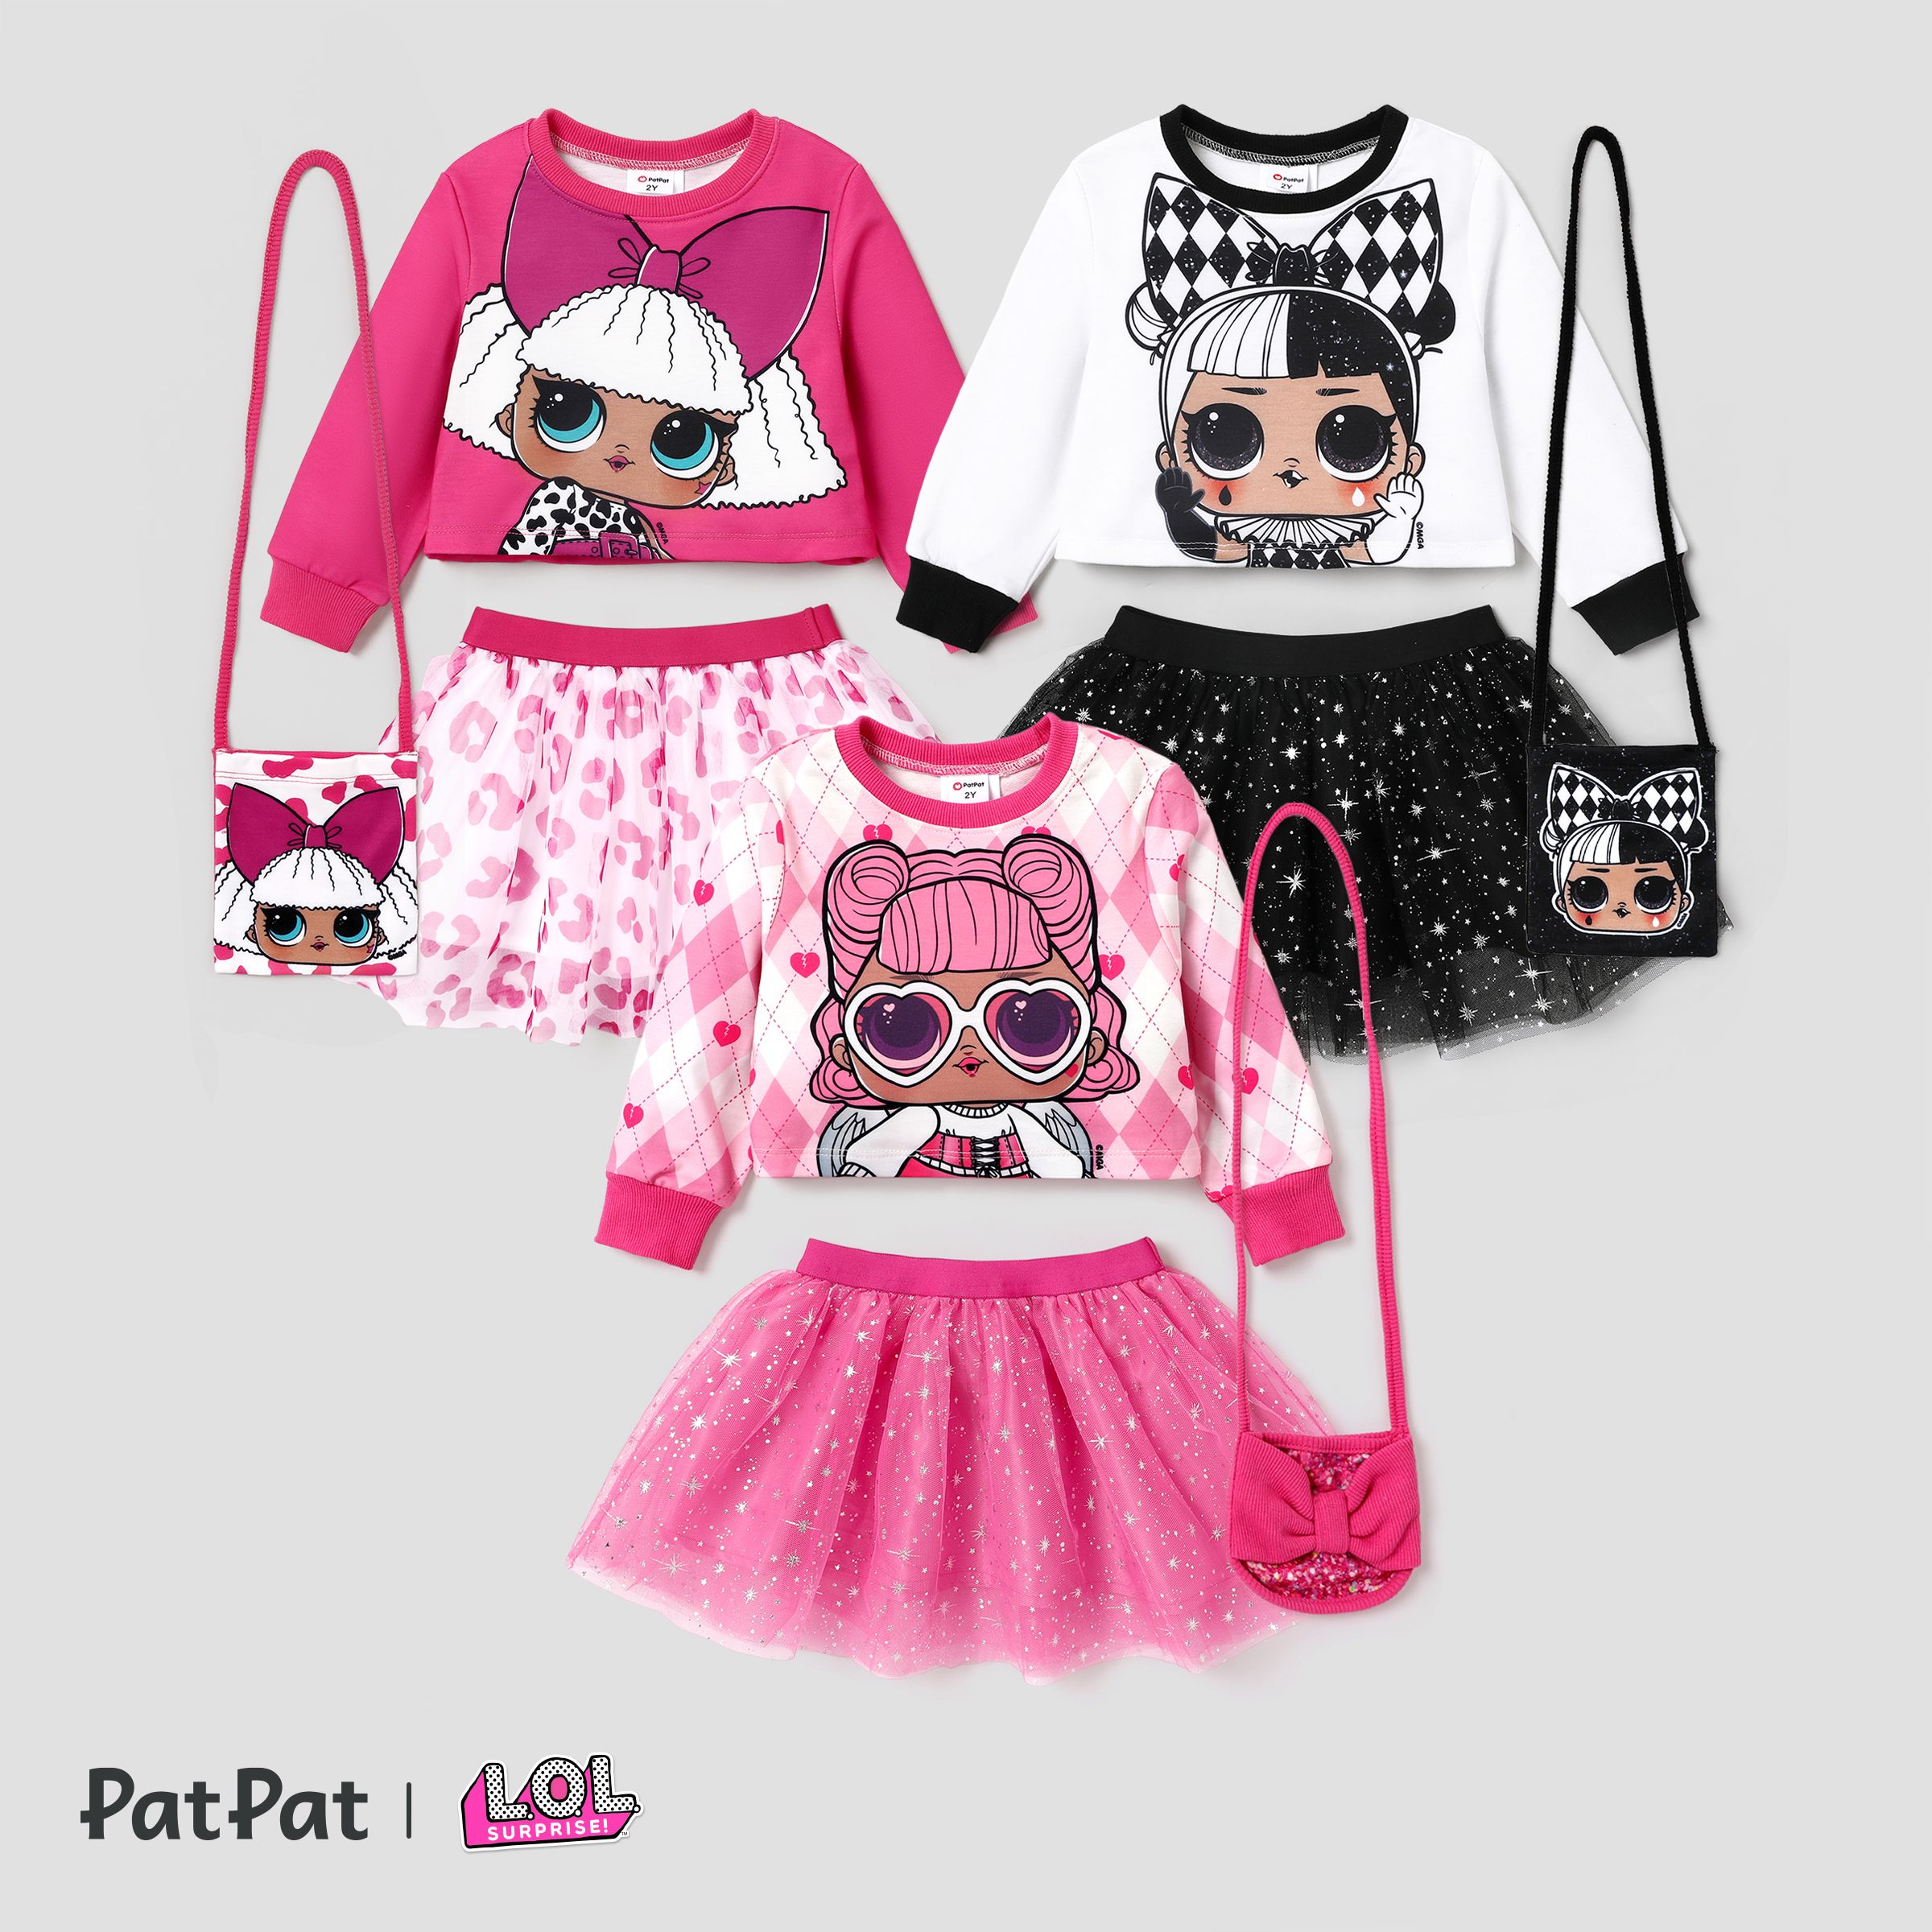 L.O.L. SURPRISE! Toddler Girl Glitter Hem Character Pattern Top With Crossbody Bag Skirt Suit